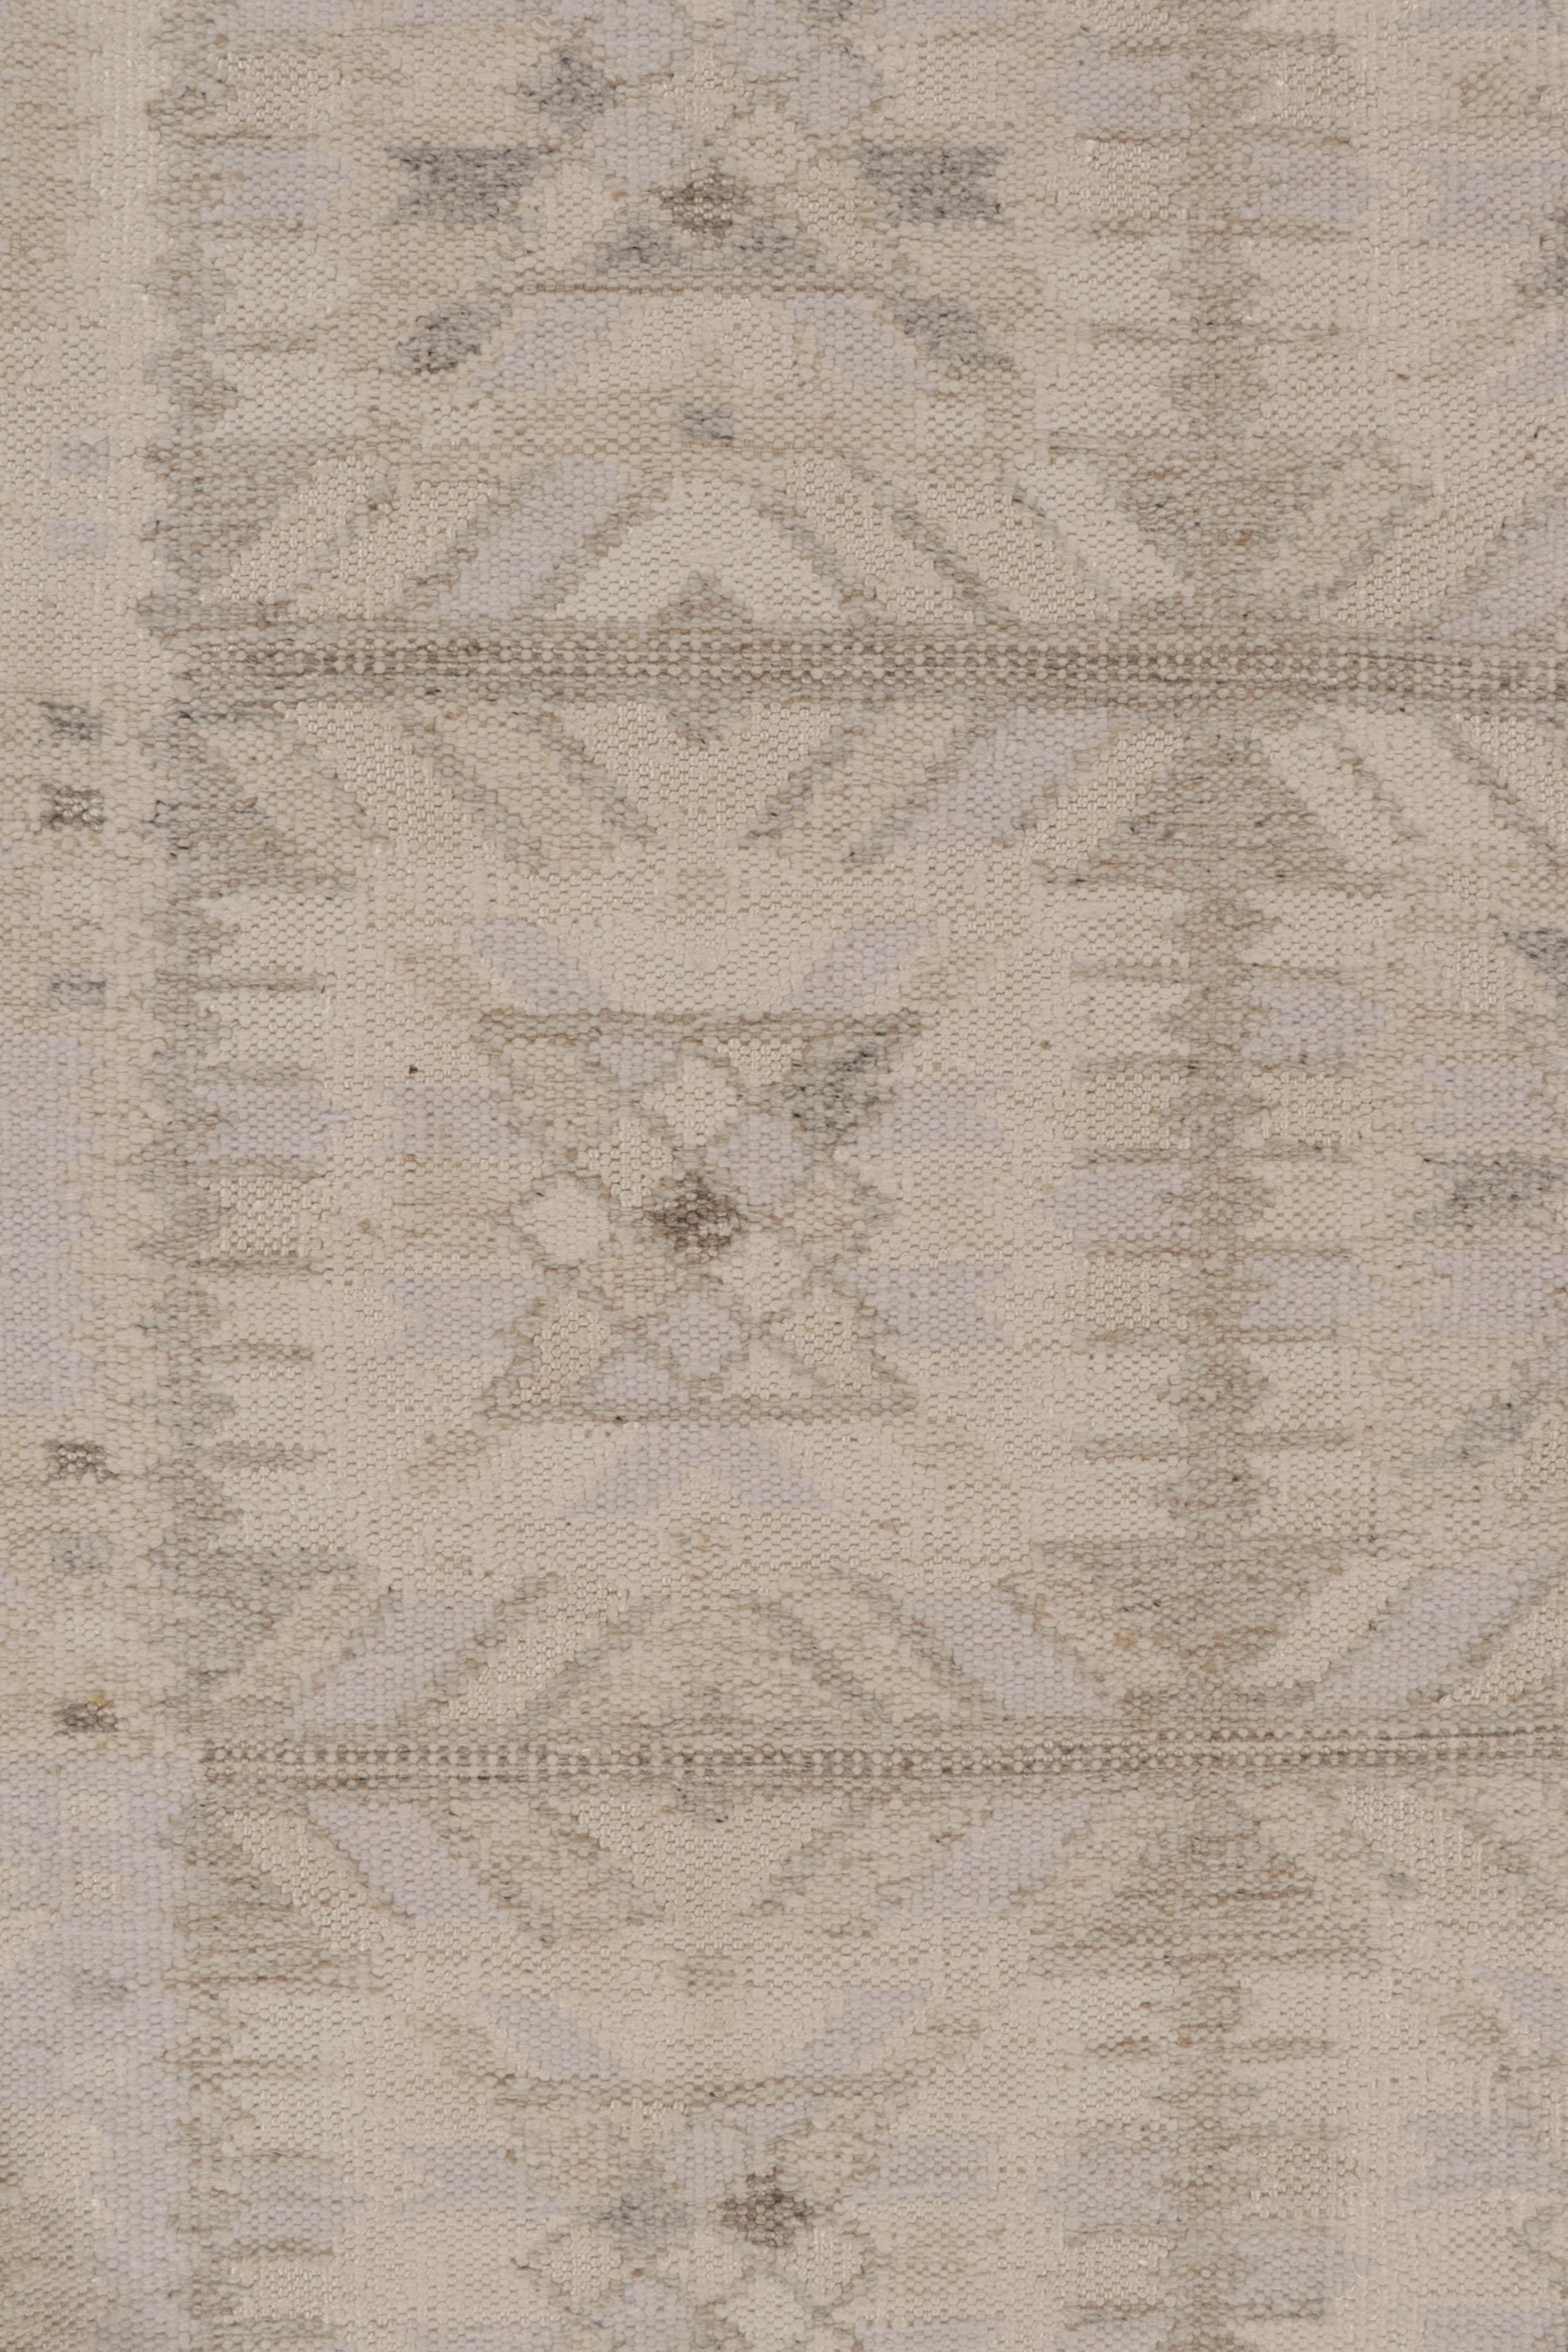 Rug & Kilim’s Scandinavian Style Kilim in White and Gray Geometric Patterns In New Condition For Sale In Long Island City, NY